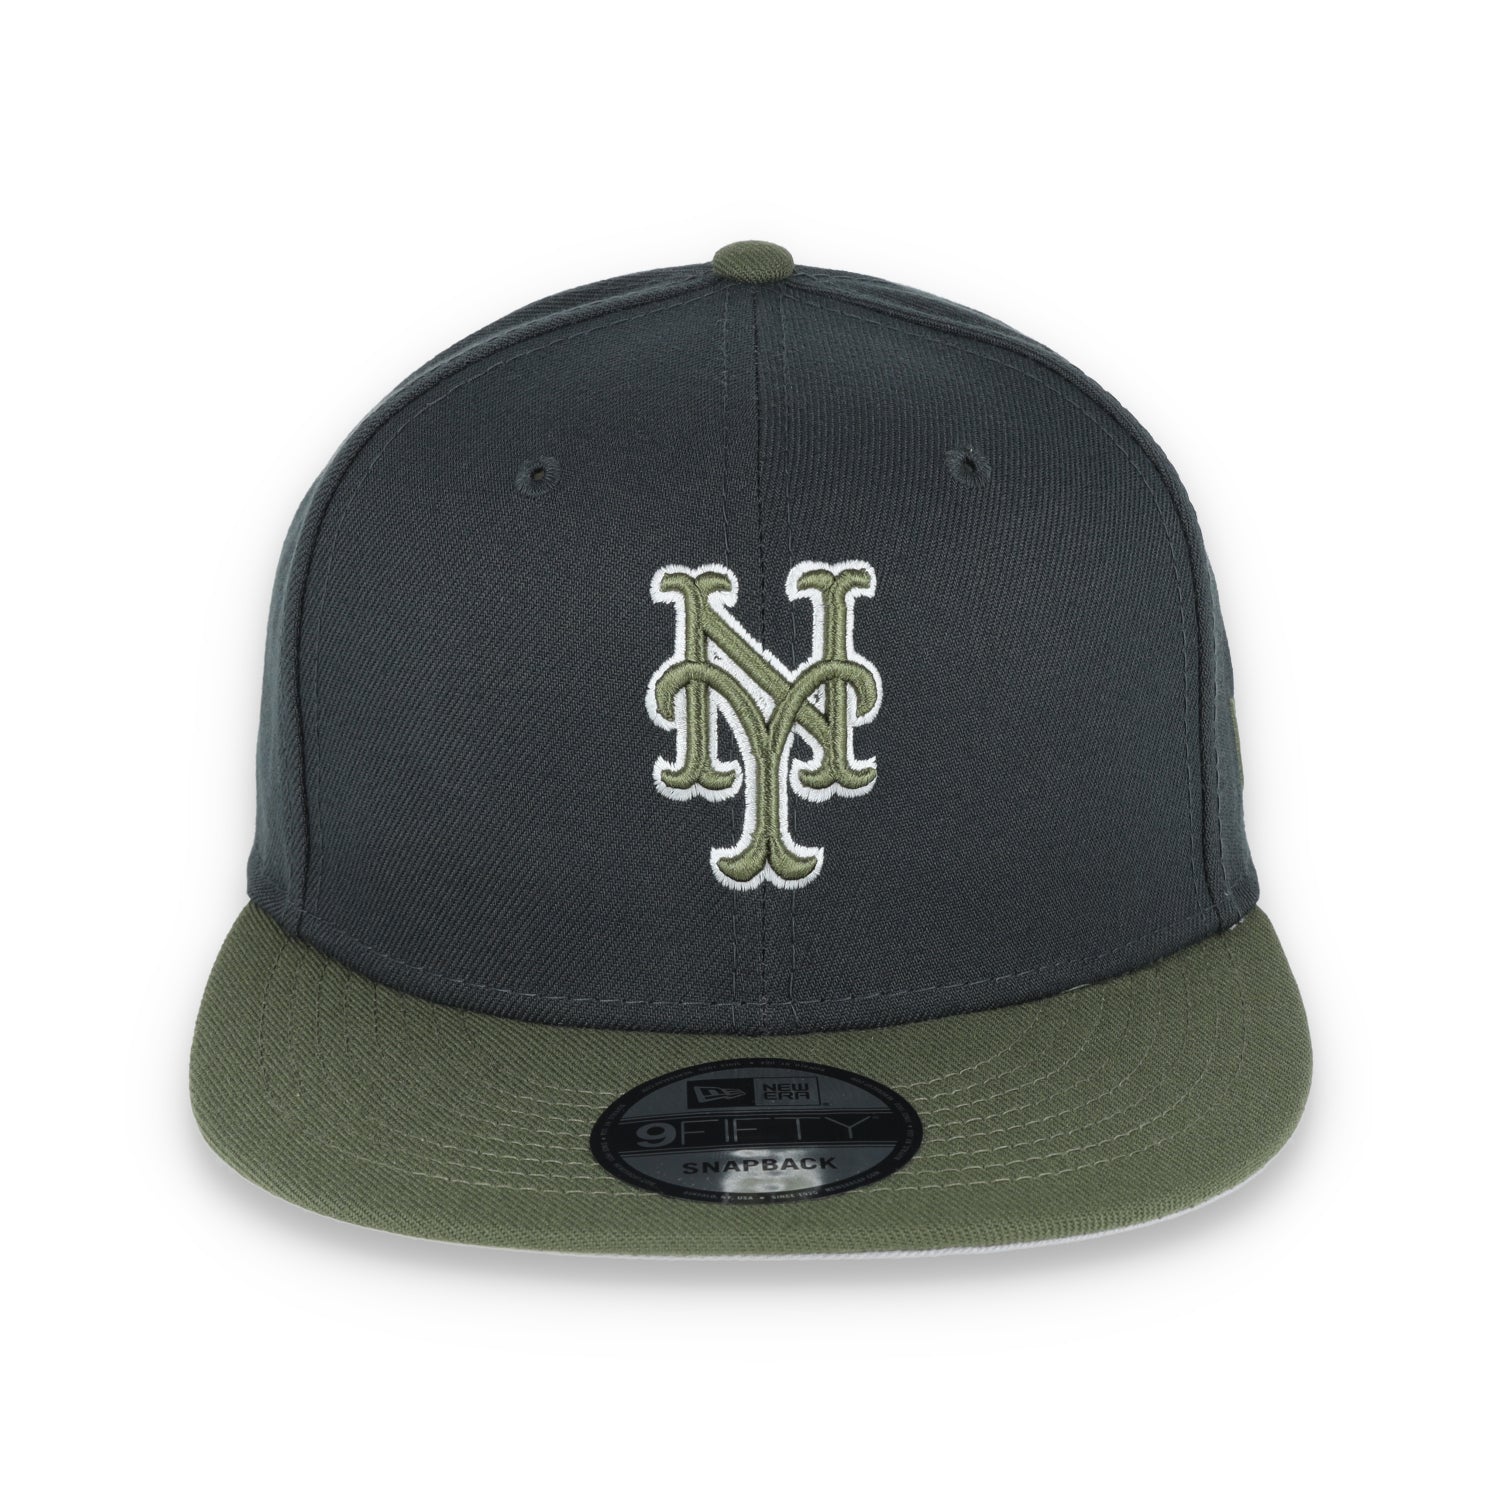 New Era New York Mets 2-Tone Color Pack 9FIFTY Snapback Hat- Grey/Olive